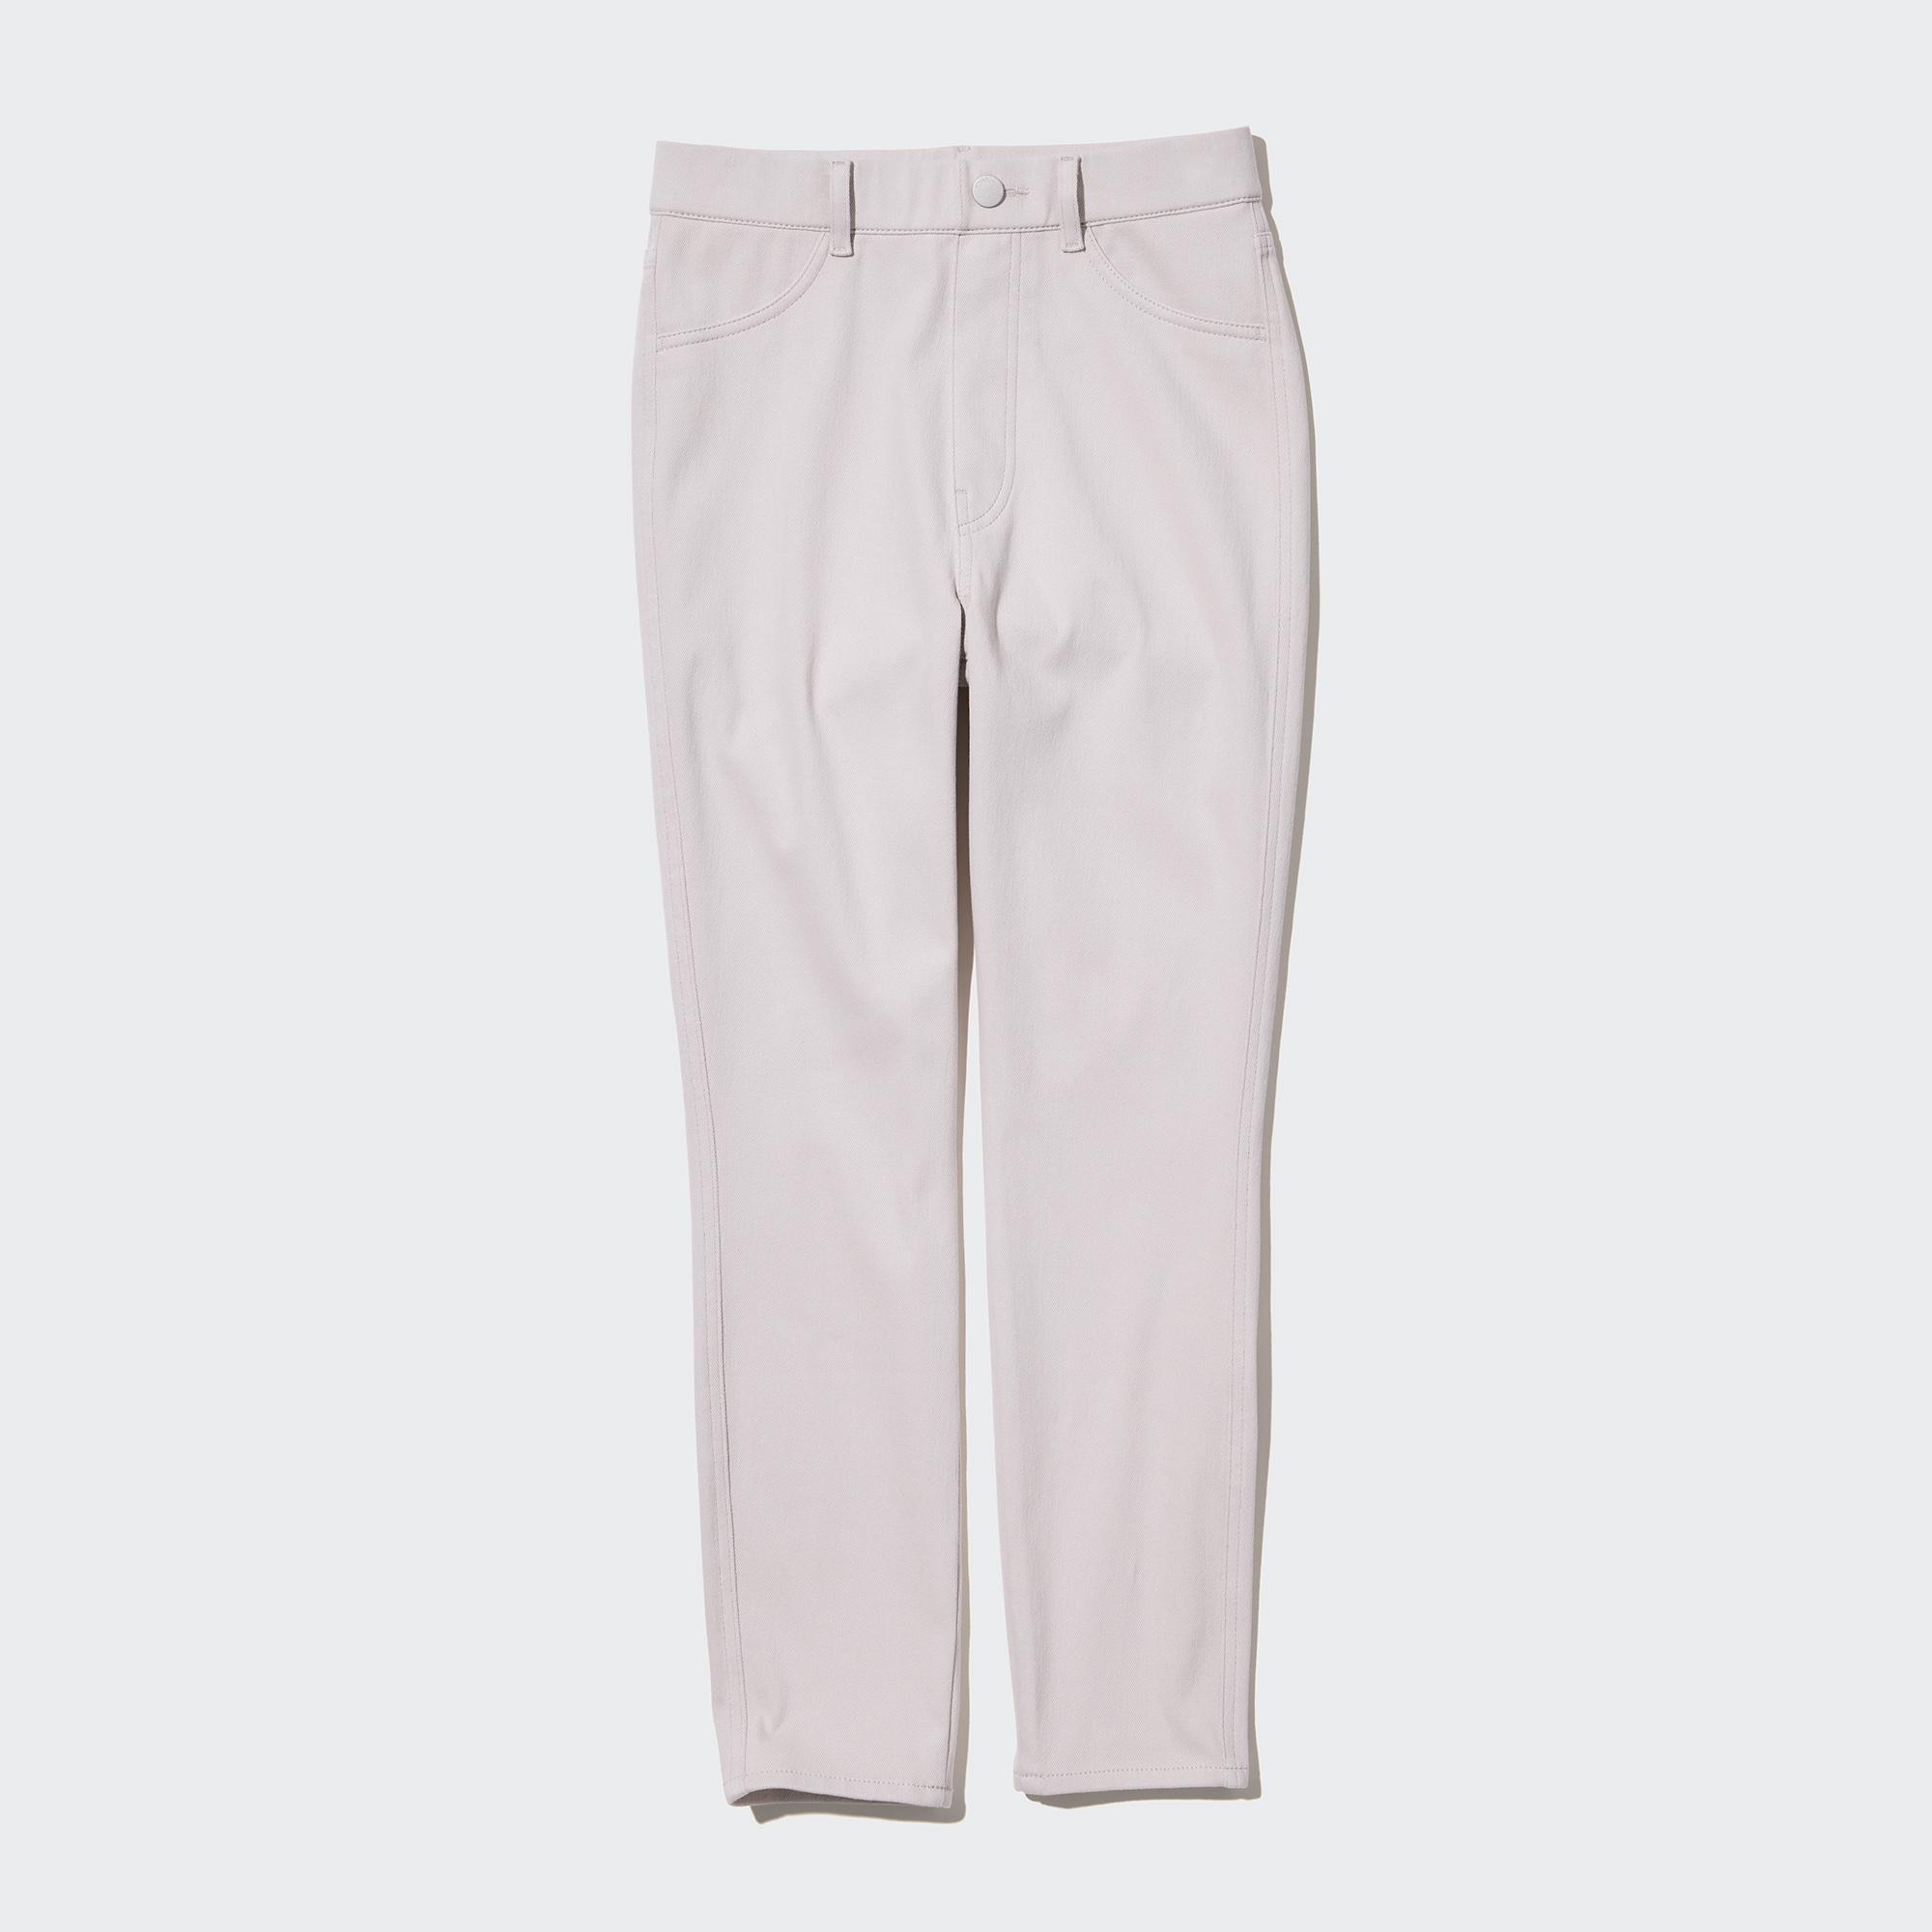 Uniqlo Singapore - It's your UNIQLO favourites at new, lower prices! Shop  Men's Extra Fine Cotton Broadcloth Long Sleeve Shirt: http://s.uniqlo.com/2gw2XG9  Shop Women's Legging Pants: http://s.uniqlo.com/2gUPsDi | Facebook